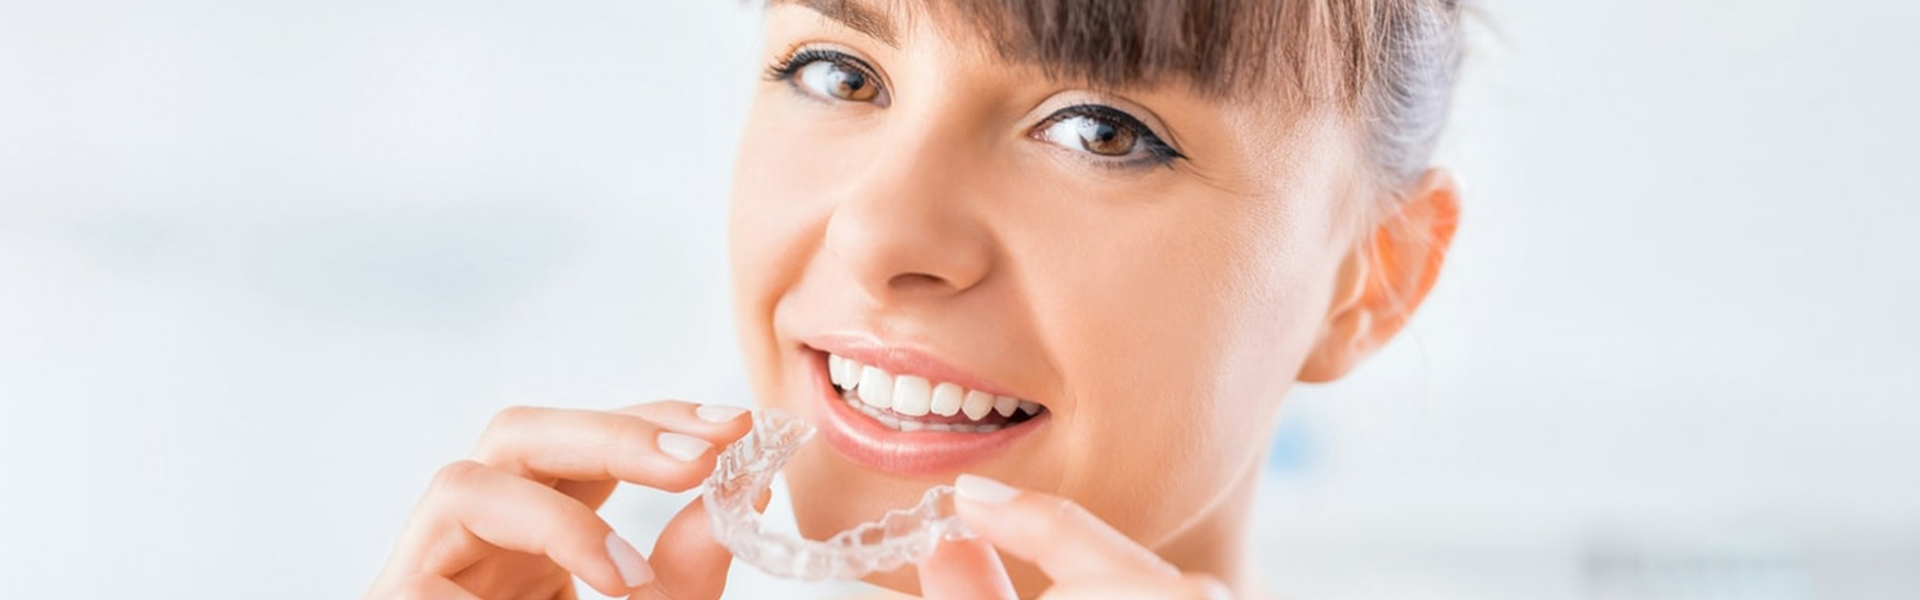 Are Invisalign Clear Aligners Effective In Reality?